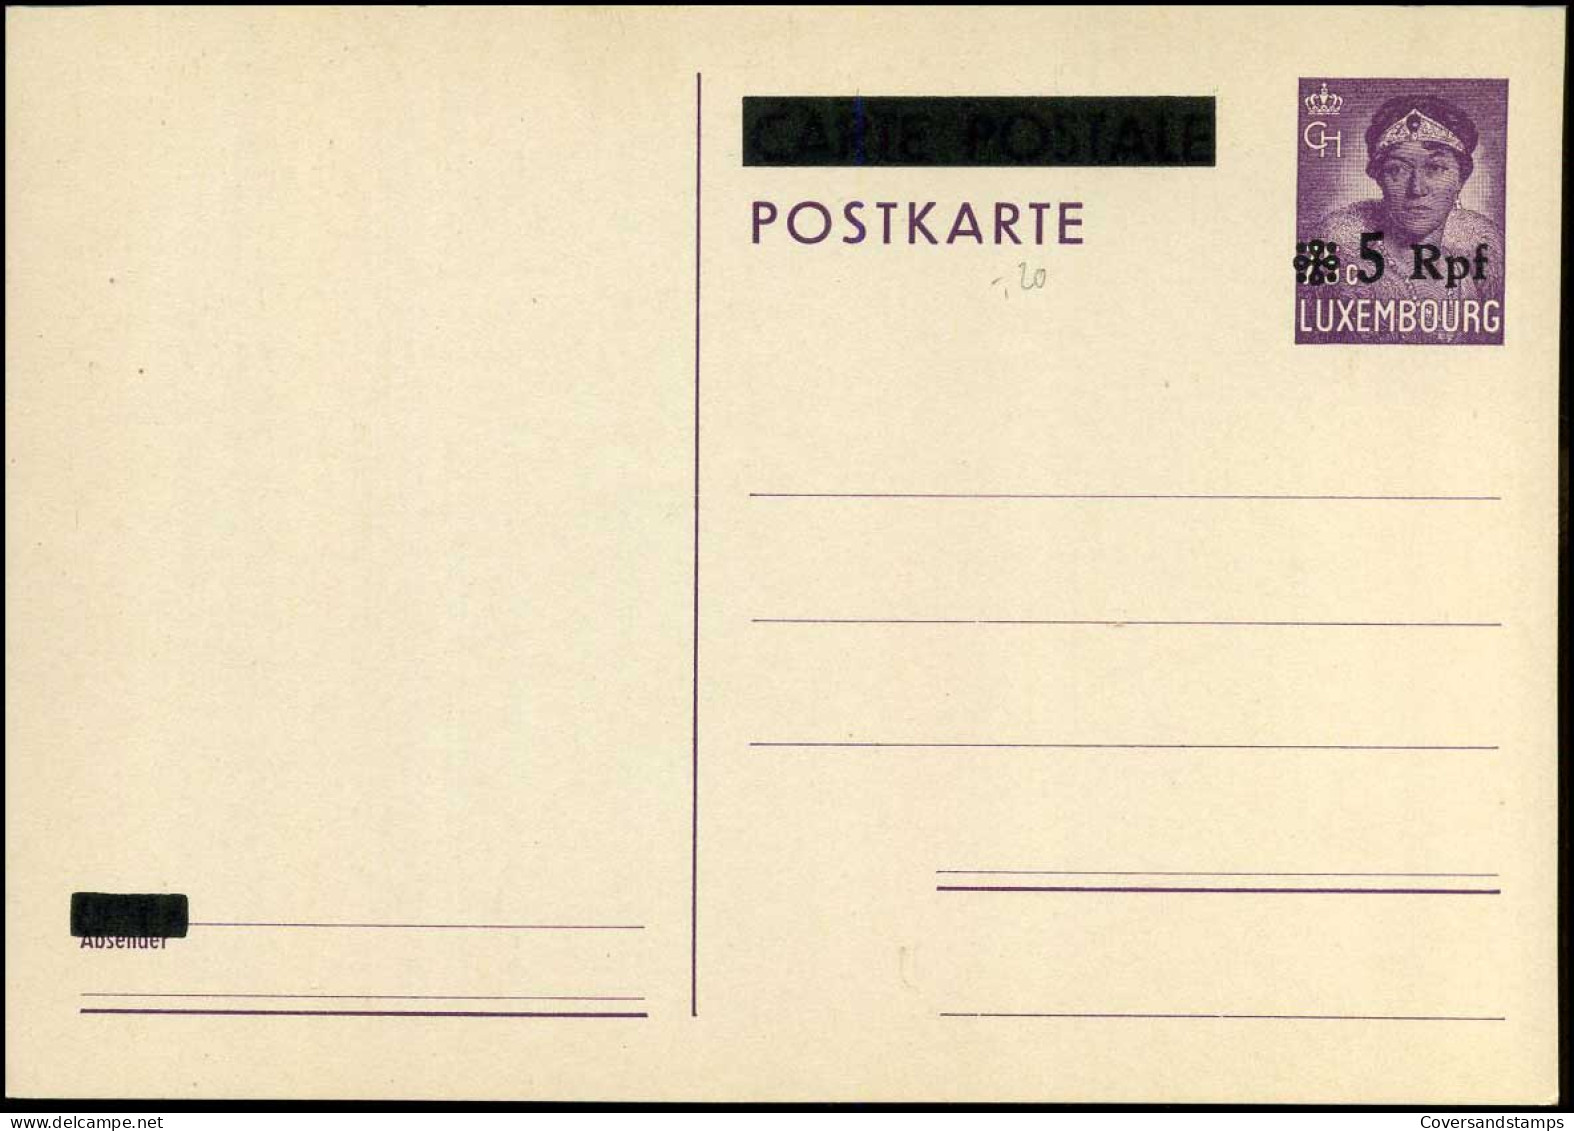 Luxembourg - Post Card - 5 Rpf On 75 C - Stamped Stationery